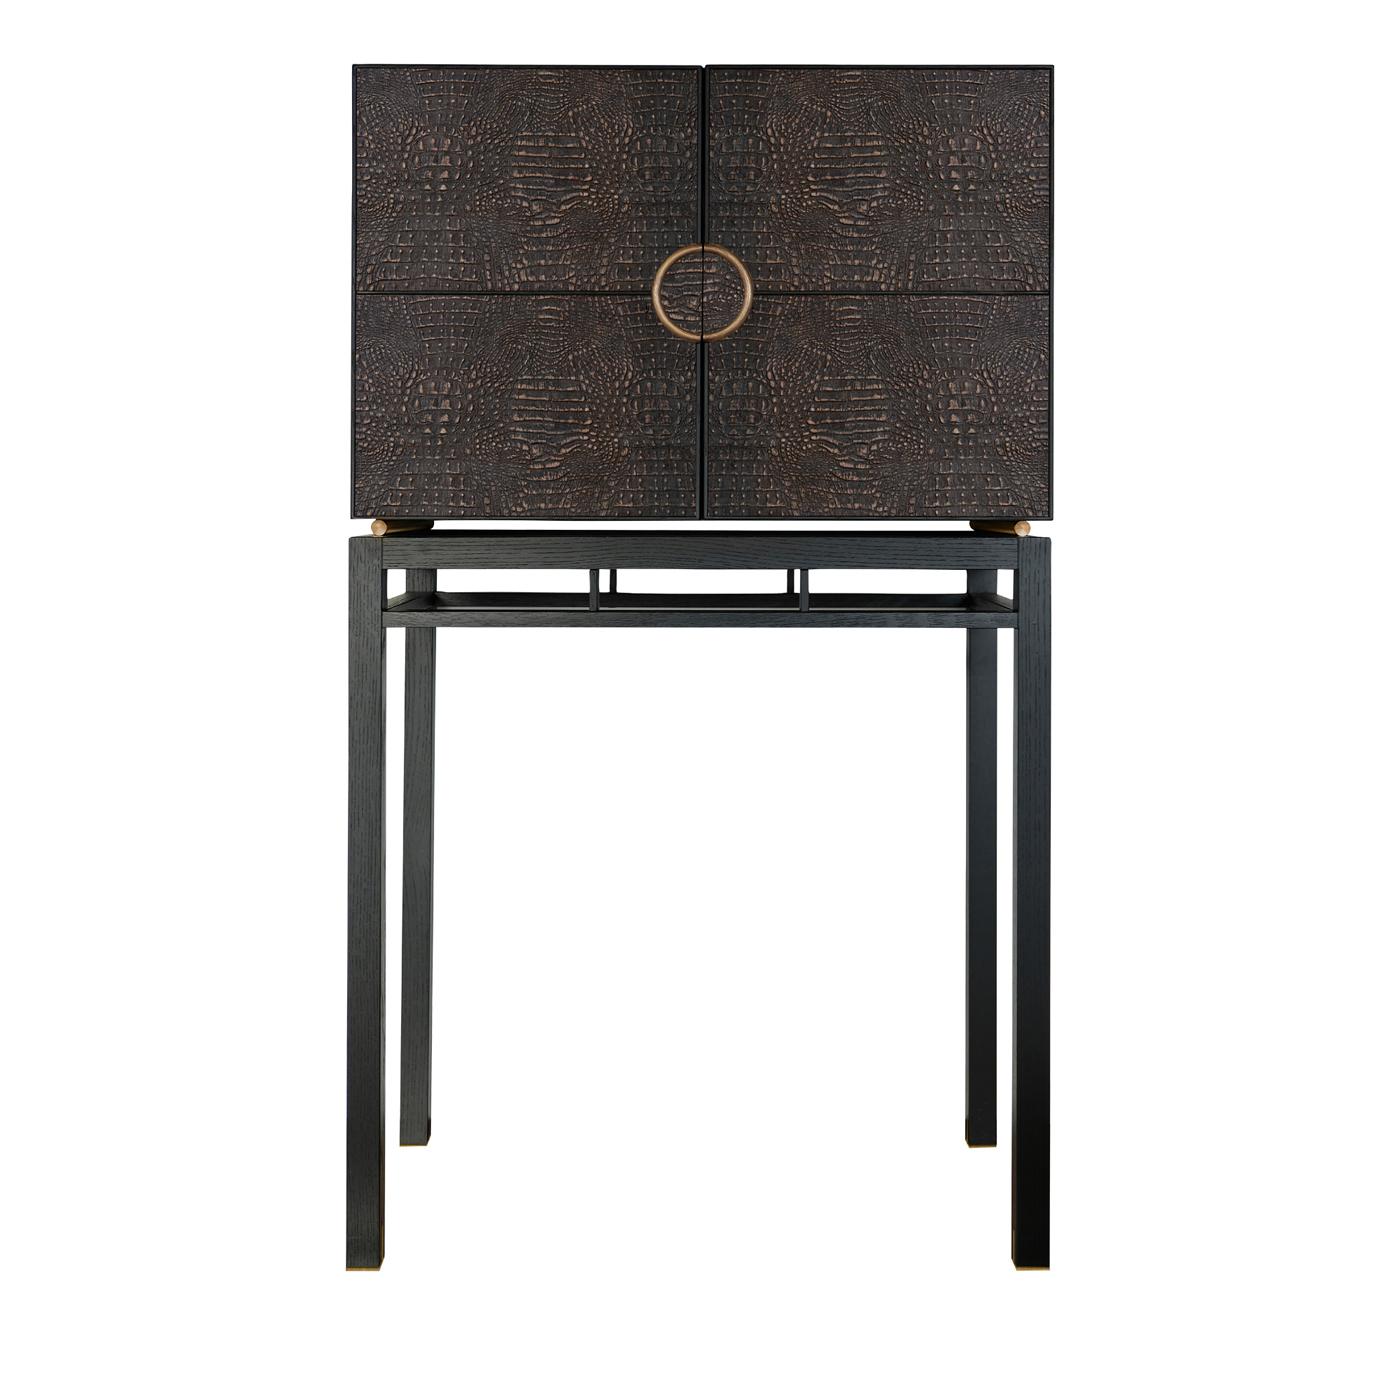 This bar cabinet perfectly embodies the harmony between refined sophistication and essential functionality. Crafted of stained oakwood, its two doors are upholstered with crocodile-stained cork and are equipped with a galvanized bronze handle